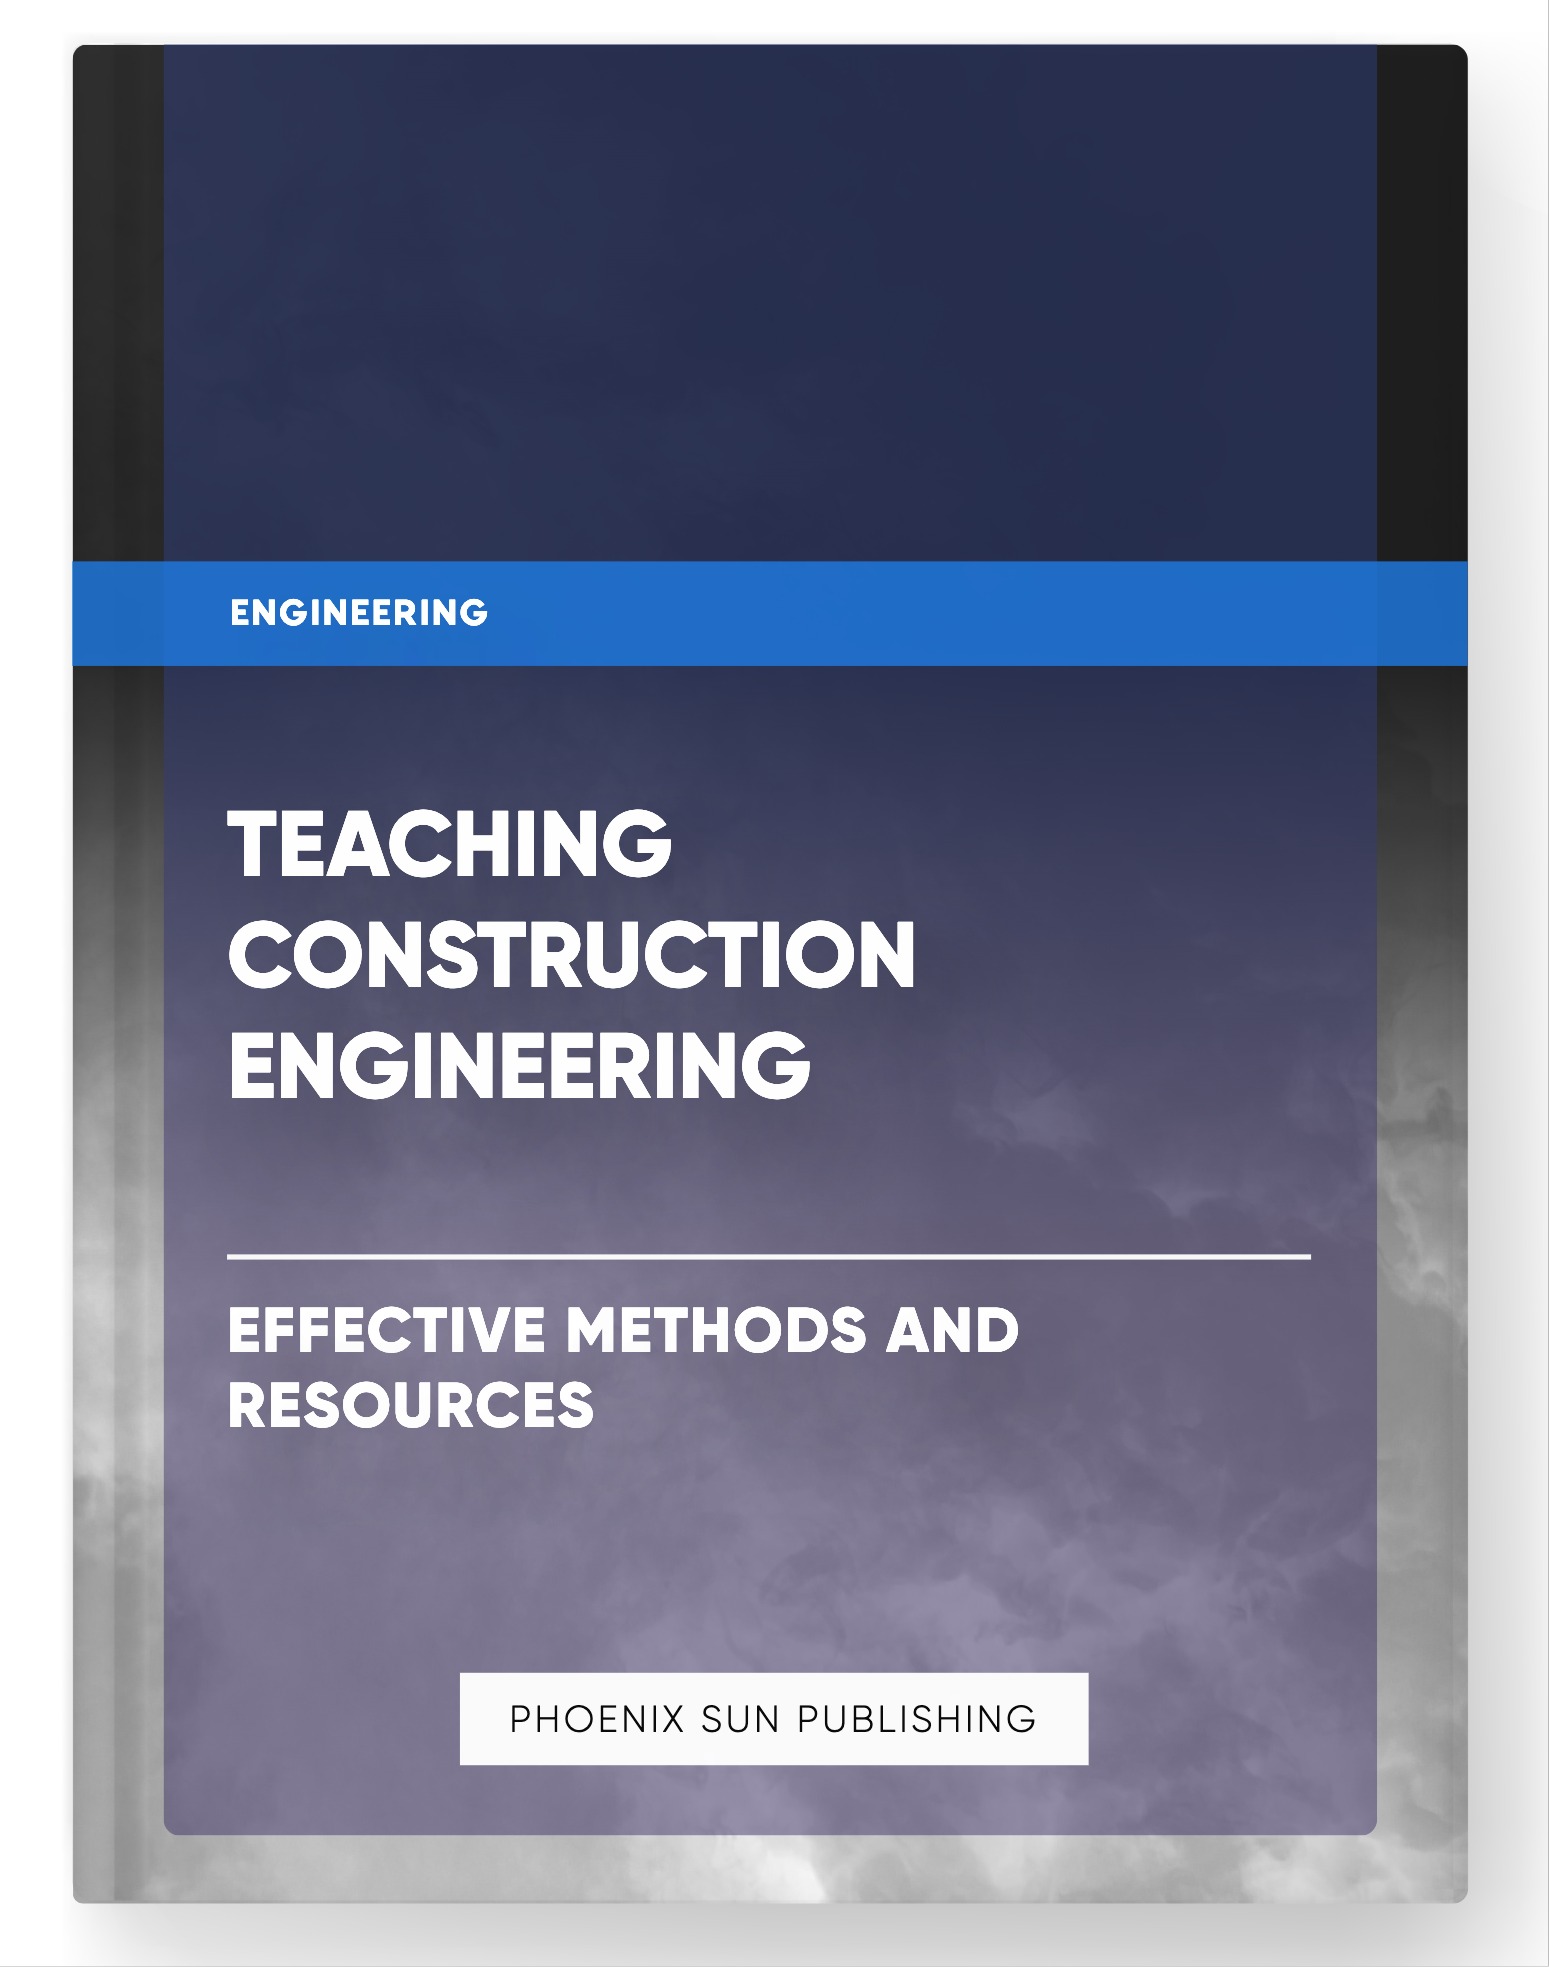 Teaching Construction Engineering – Effective Methods and Resources